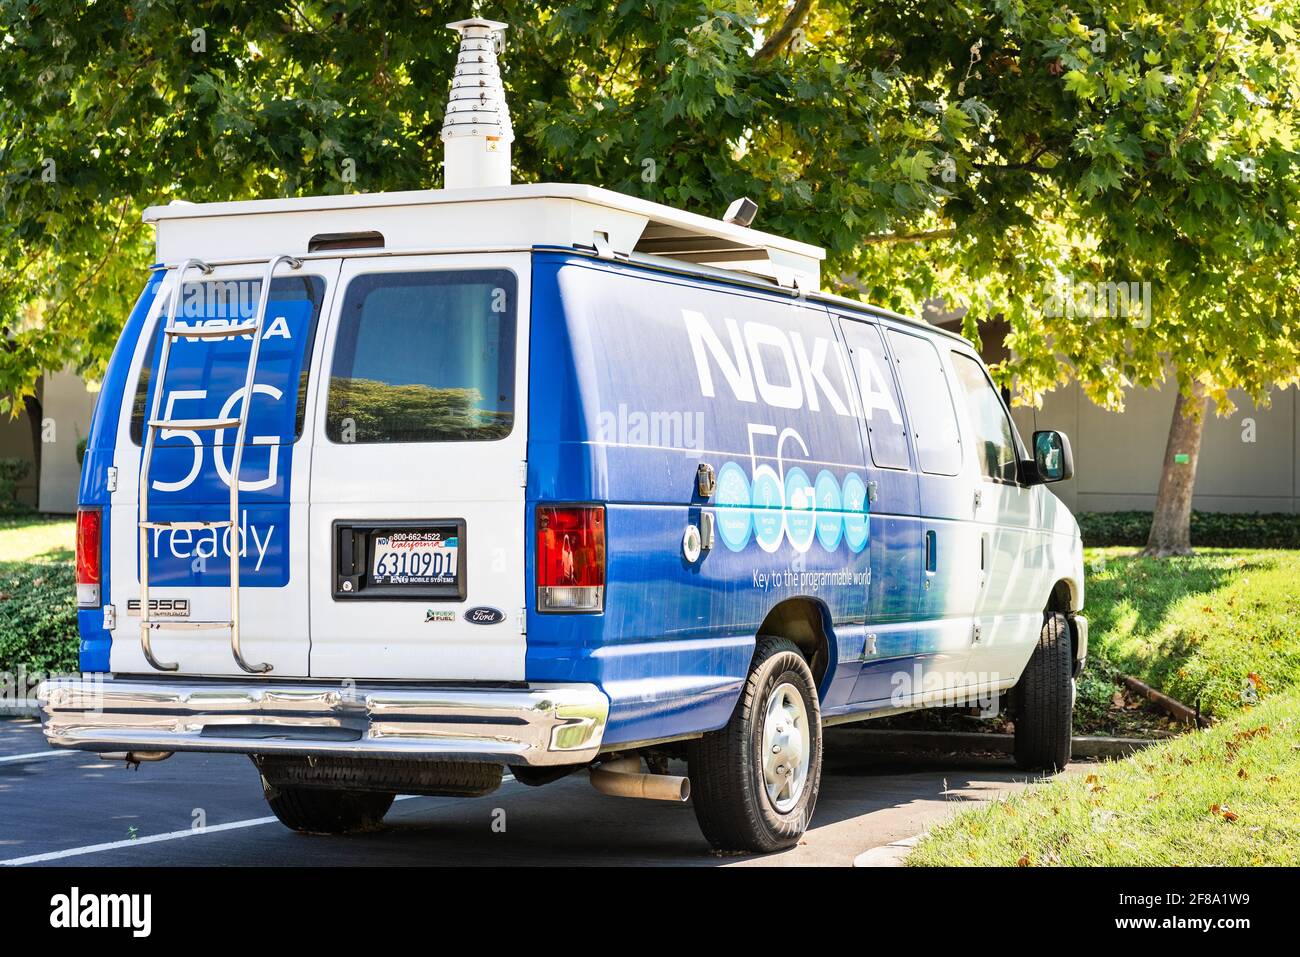 Sep 26, 2020 Mountain View / CA / USA - Nokia van branded with the 5G logo, parked at their Silicon Valley campus; Nokia is offering 5G services to ma Stock Photo